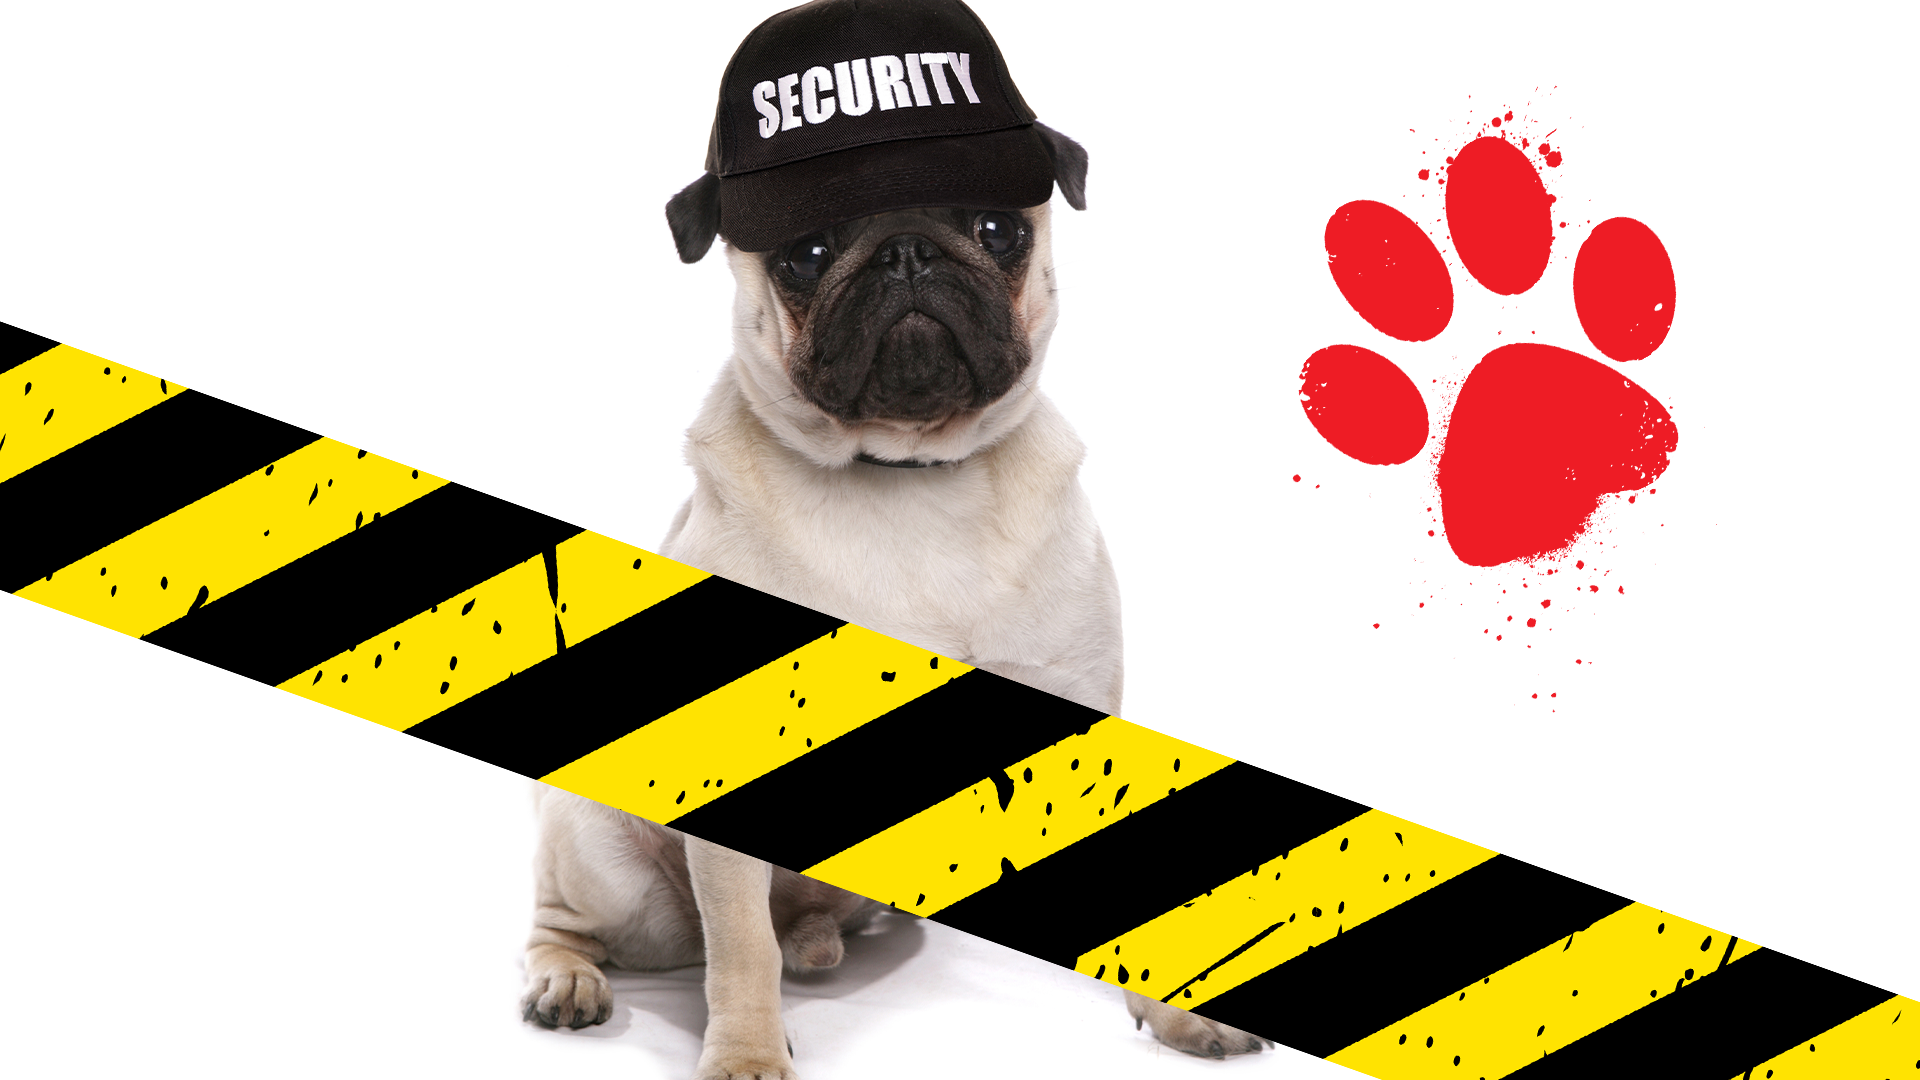 Dog with a security hat, caution tape and paw print on white background 